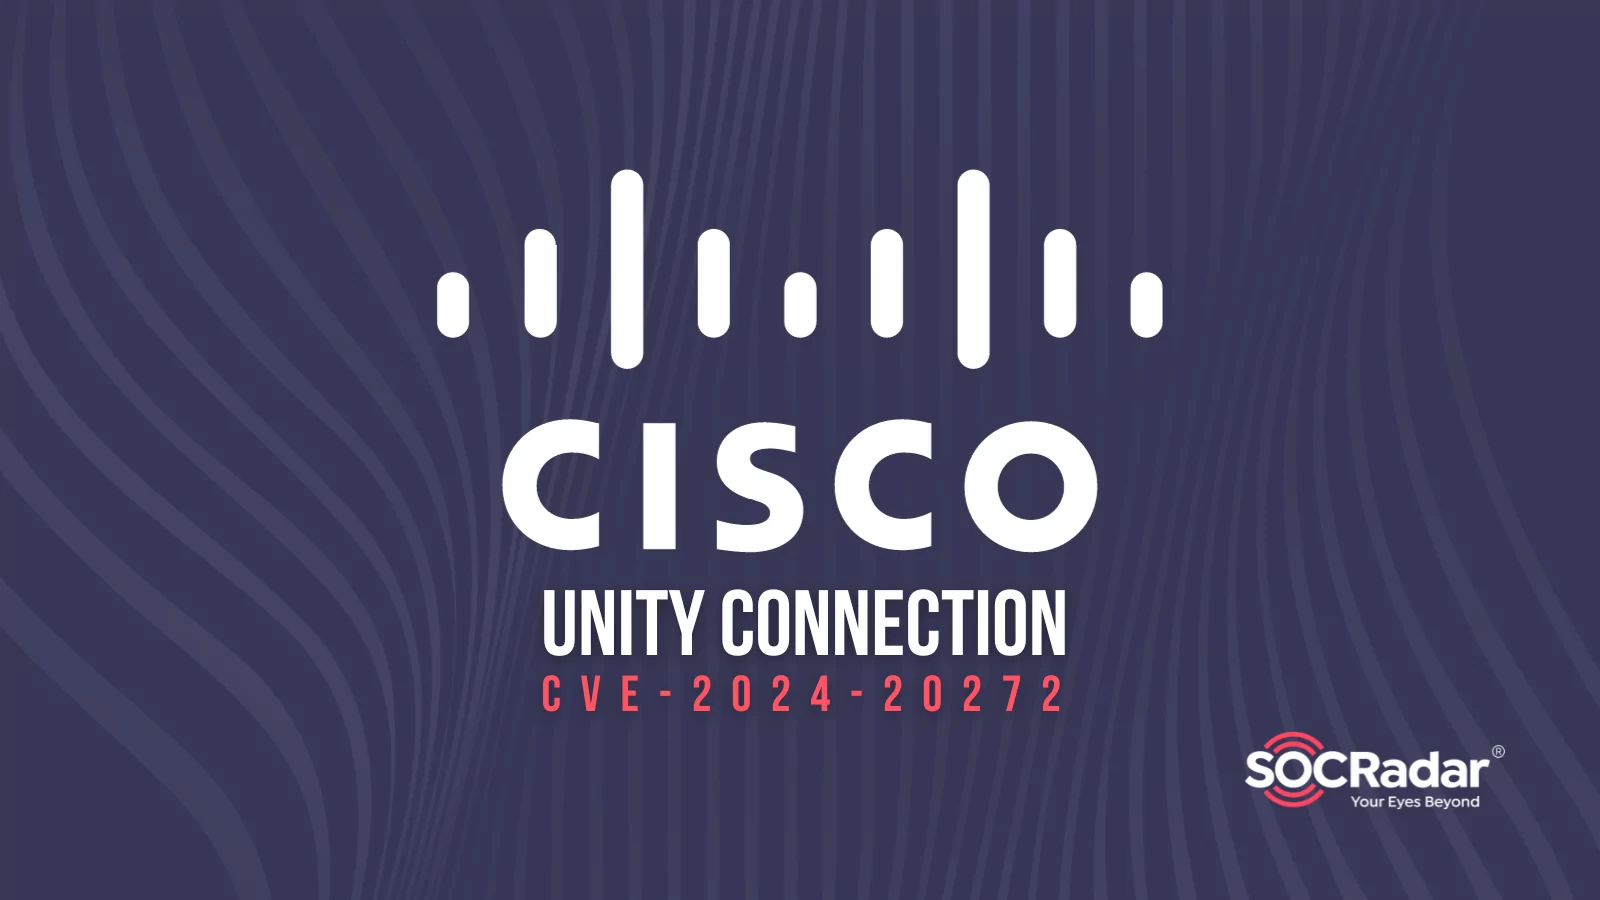 SOCRadar® Cyber Intelligence Inc. | High Severity Vulnerability in Cisco Unity Connection Could Enable Root Privileges (CVE-2024-20272)